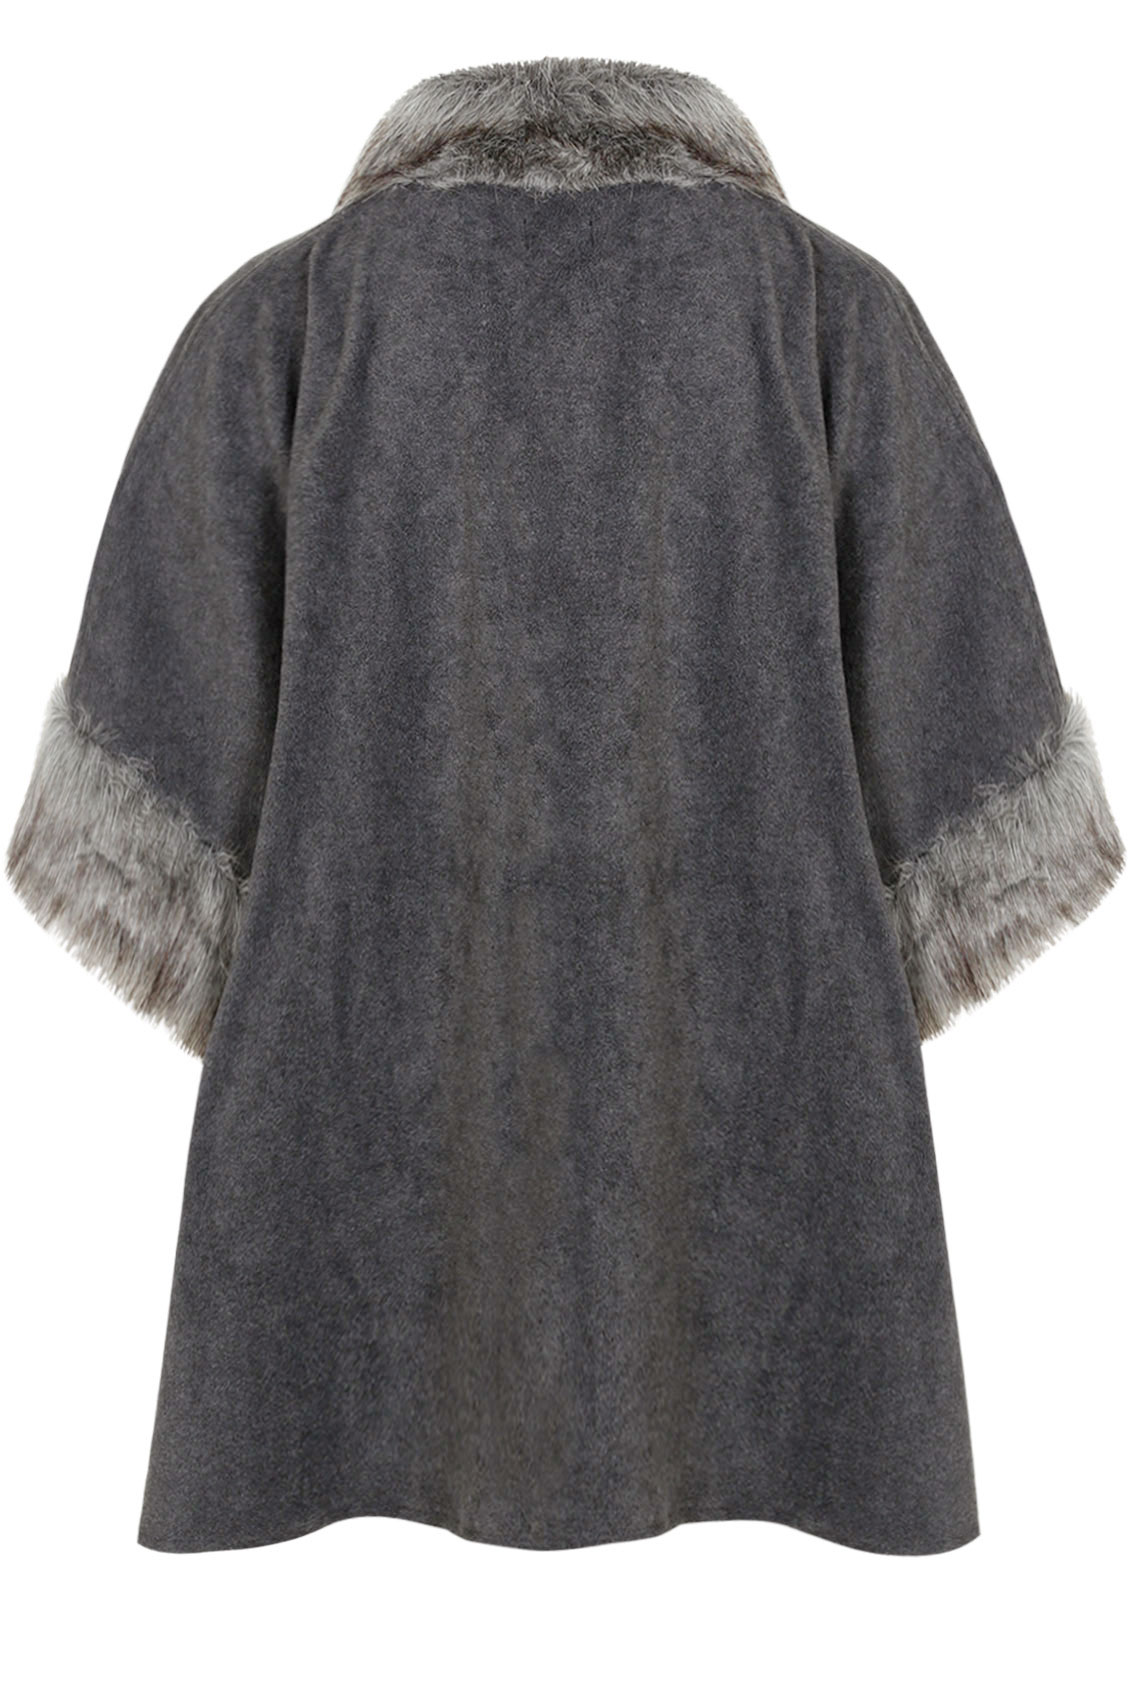 Grey Fleece Wrap With Fur Collar & Sleeves, Plus Size 16 to 28